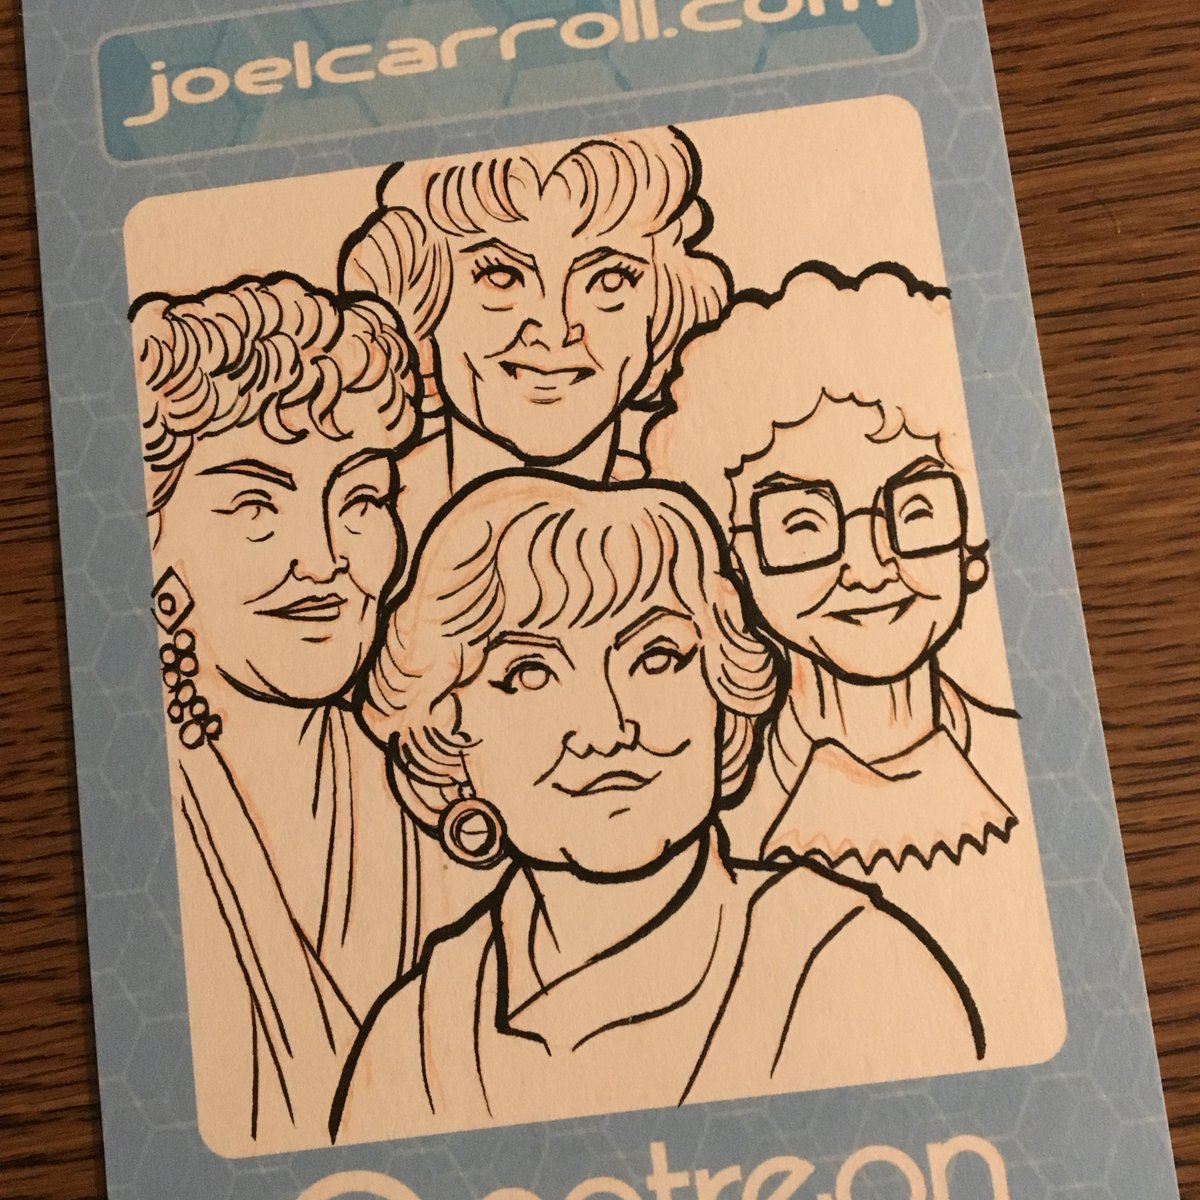 Back in 2019, my niece (7 or 8 at the time), asked me to draw the Golden Girls for her.
#RIPGoldenGirls #greatrun #thankyouforbeingafriend